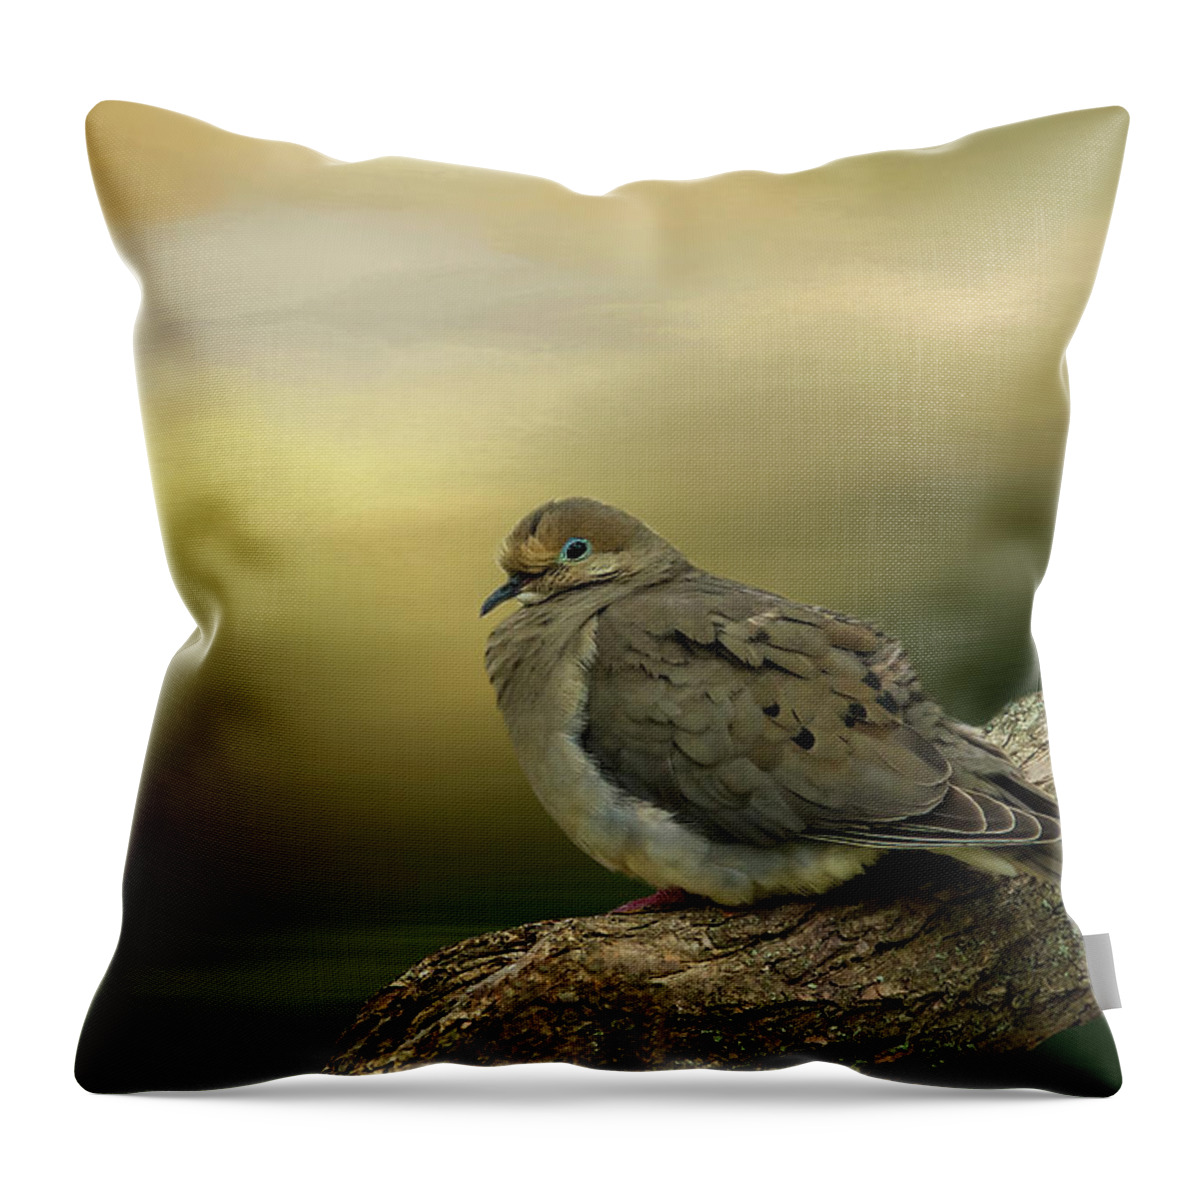 Dove Throw Pillow featuring the photograph Peaceful Dove by Cathy Kovarik